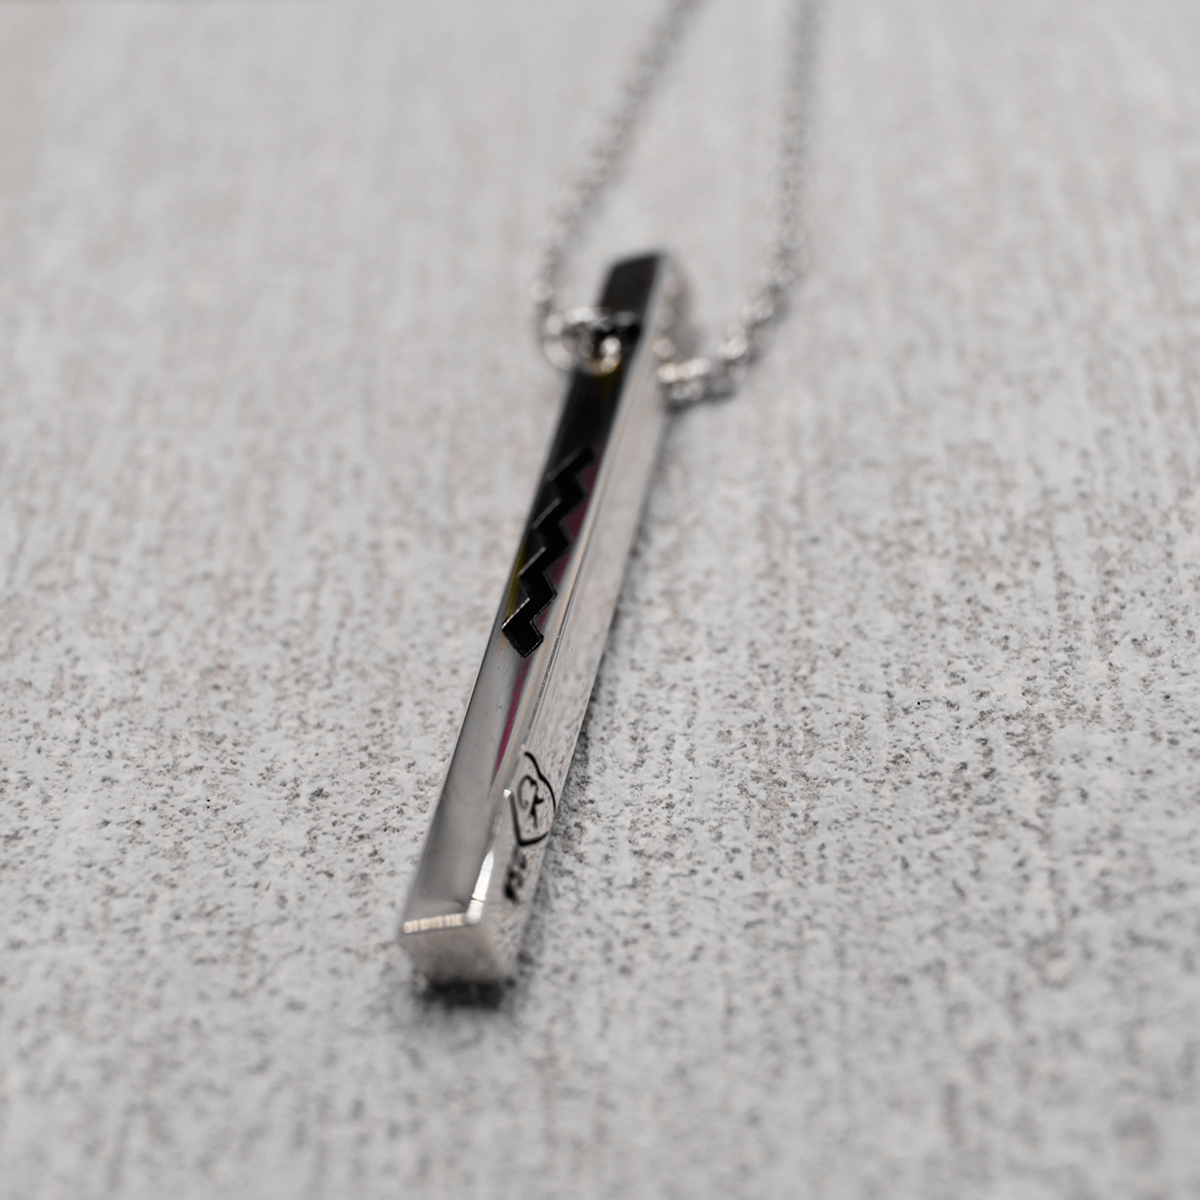 Discover the timeless elegance and captivating beauty of the EIRE - Ogham Grá & Wild Atlantic Way High Polished Bar Silver Pendant. Boasting a 3.5mm width and 40mm length, it's laser engraved with Ogham Grá on one side and the Wild Atlantic Way symbol on the other. Show off your love for the Wild Atlantic Way with its adjustable silver rolo chain stretching from 18" to 20", offering virtually endless styling possibilities!